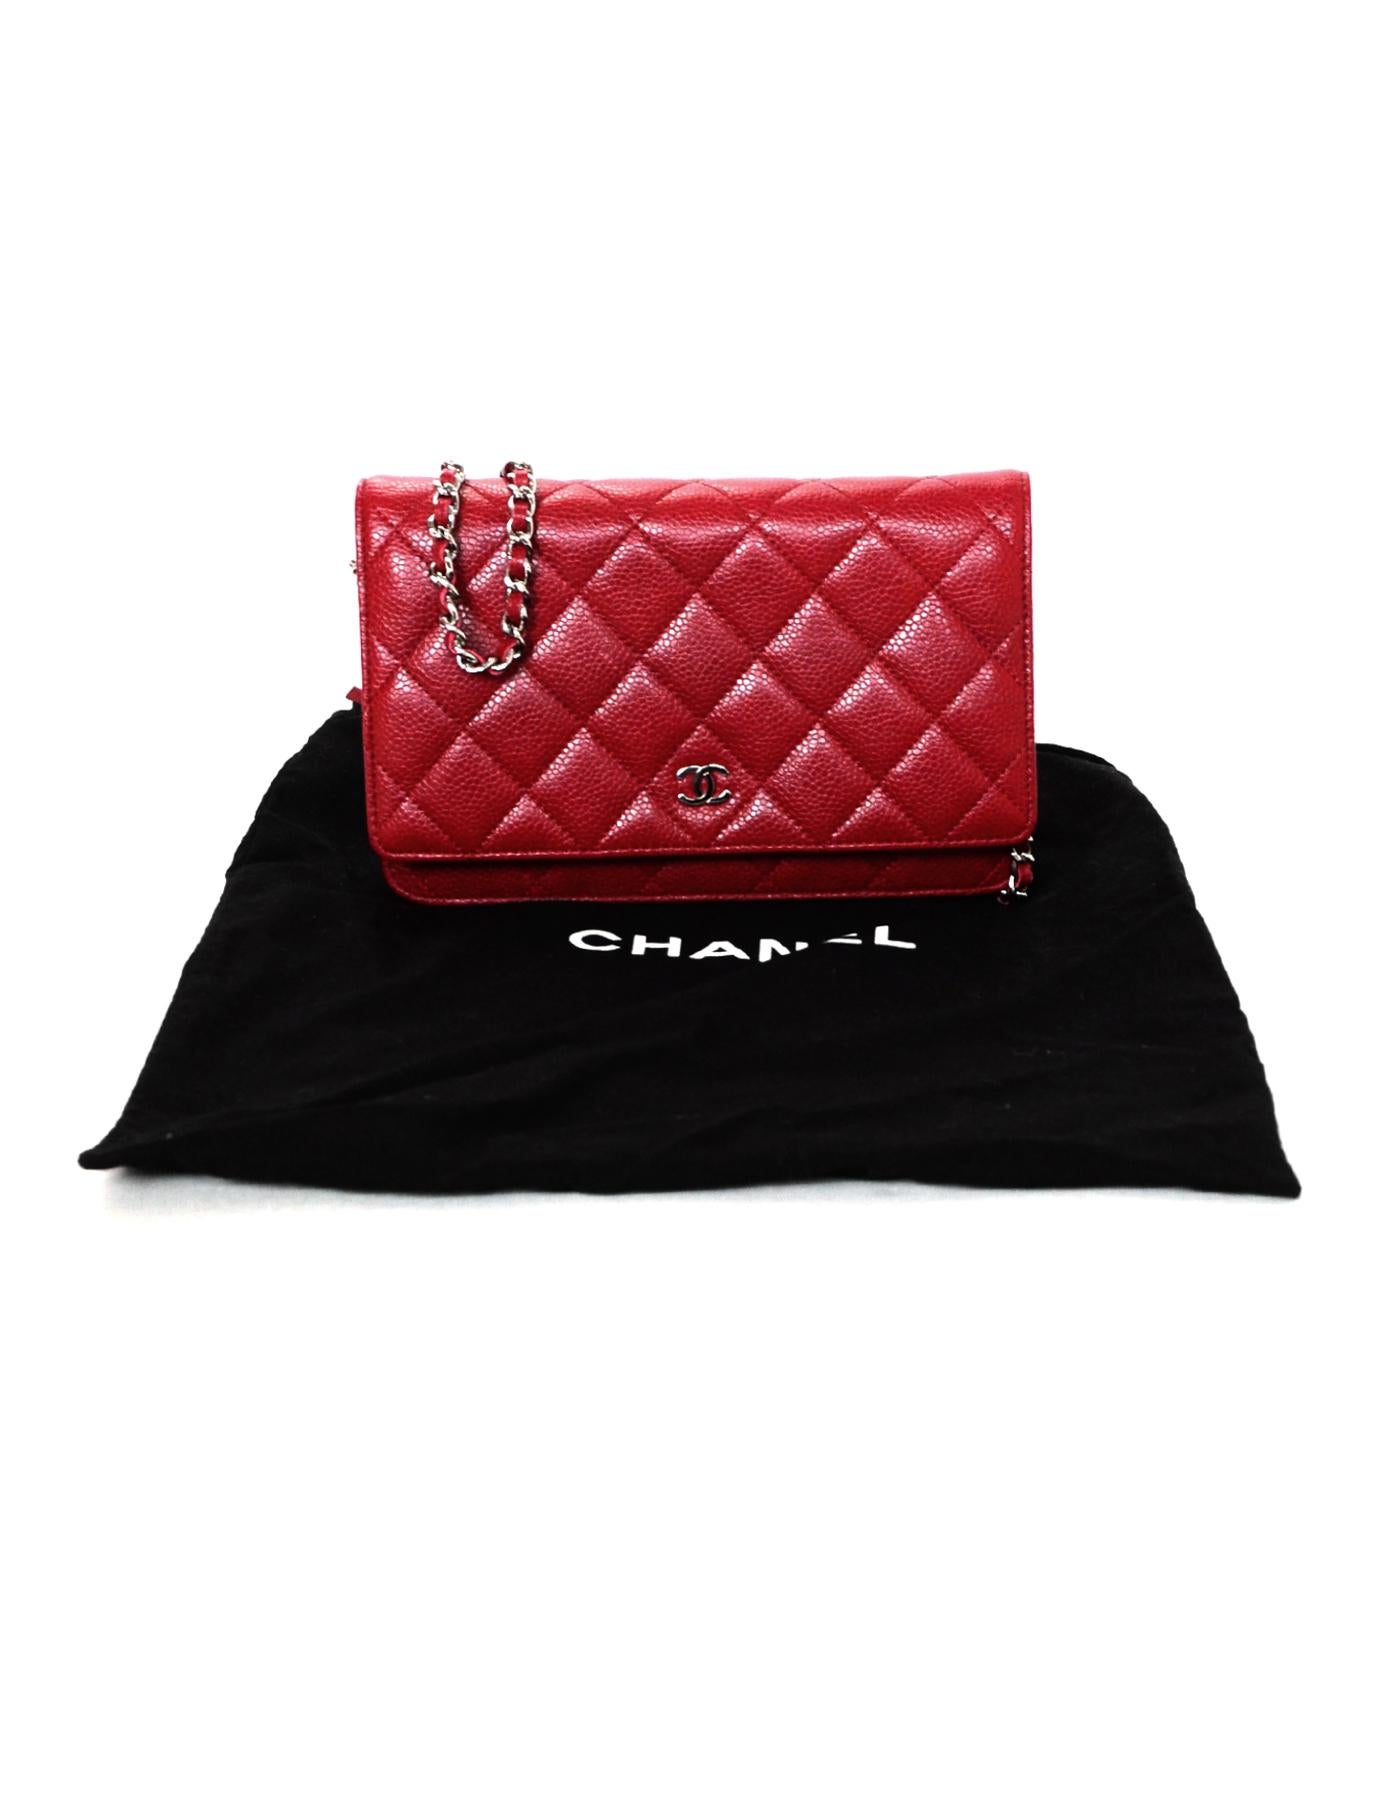 Chanel Red Caviar Leather WOC Wallet On Chain Crossbody Bag w/ Dust Bag 4